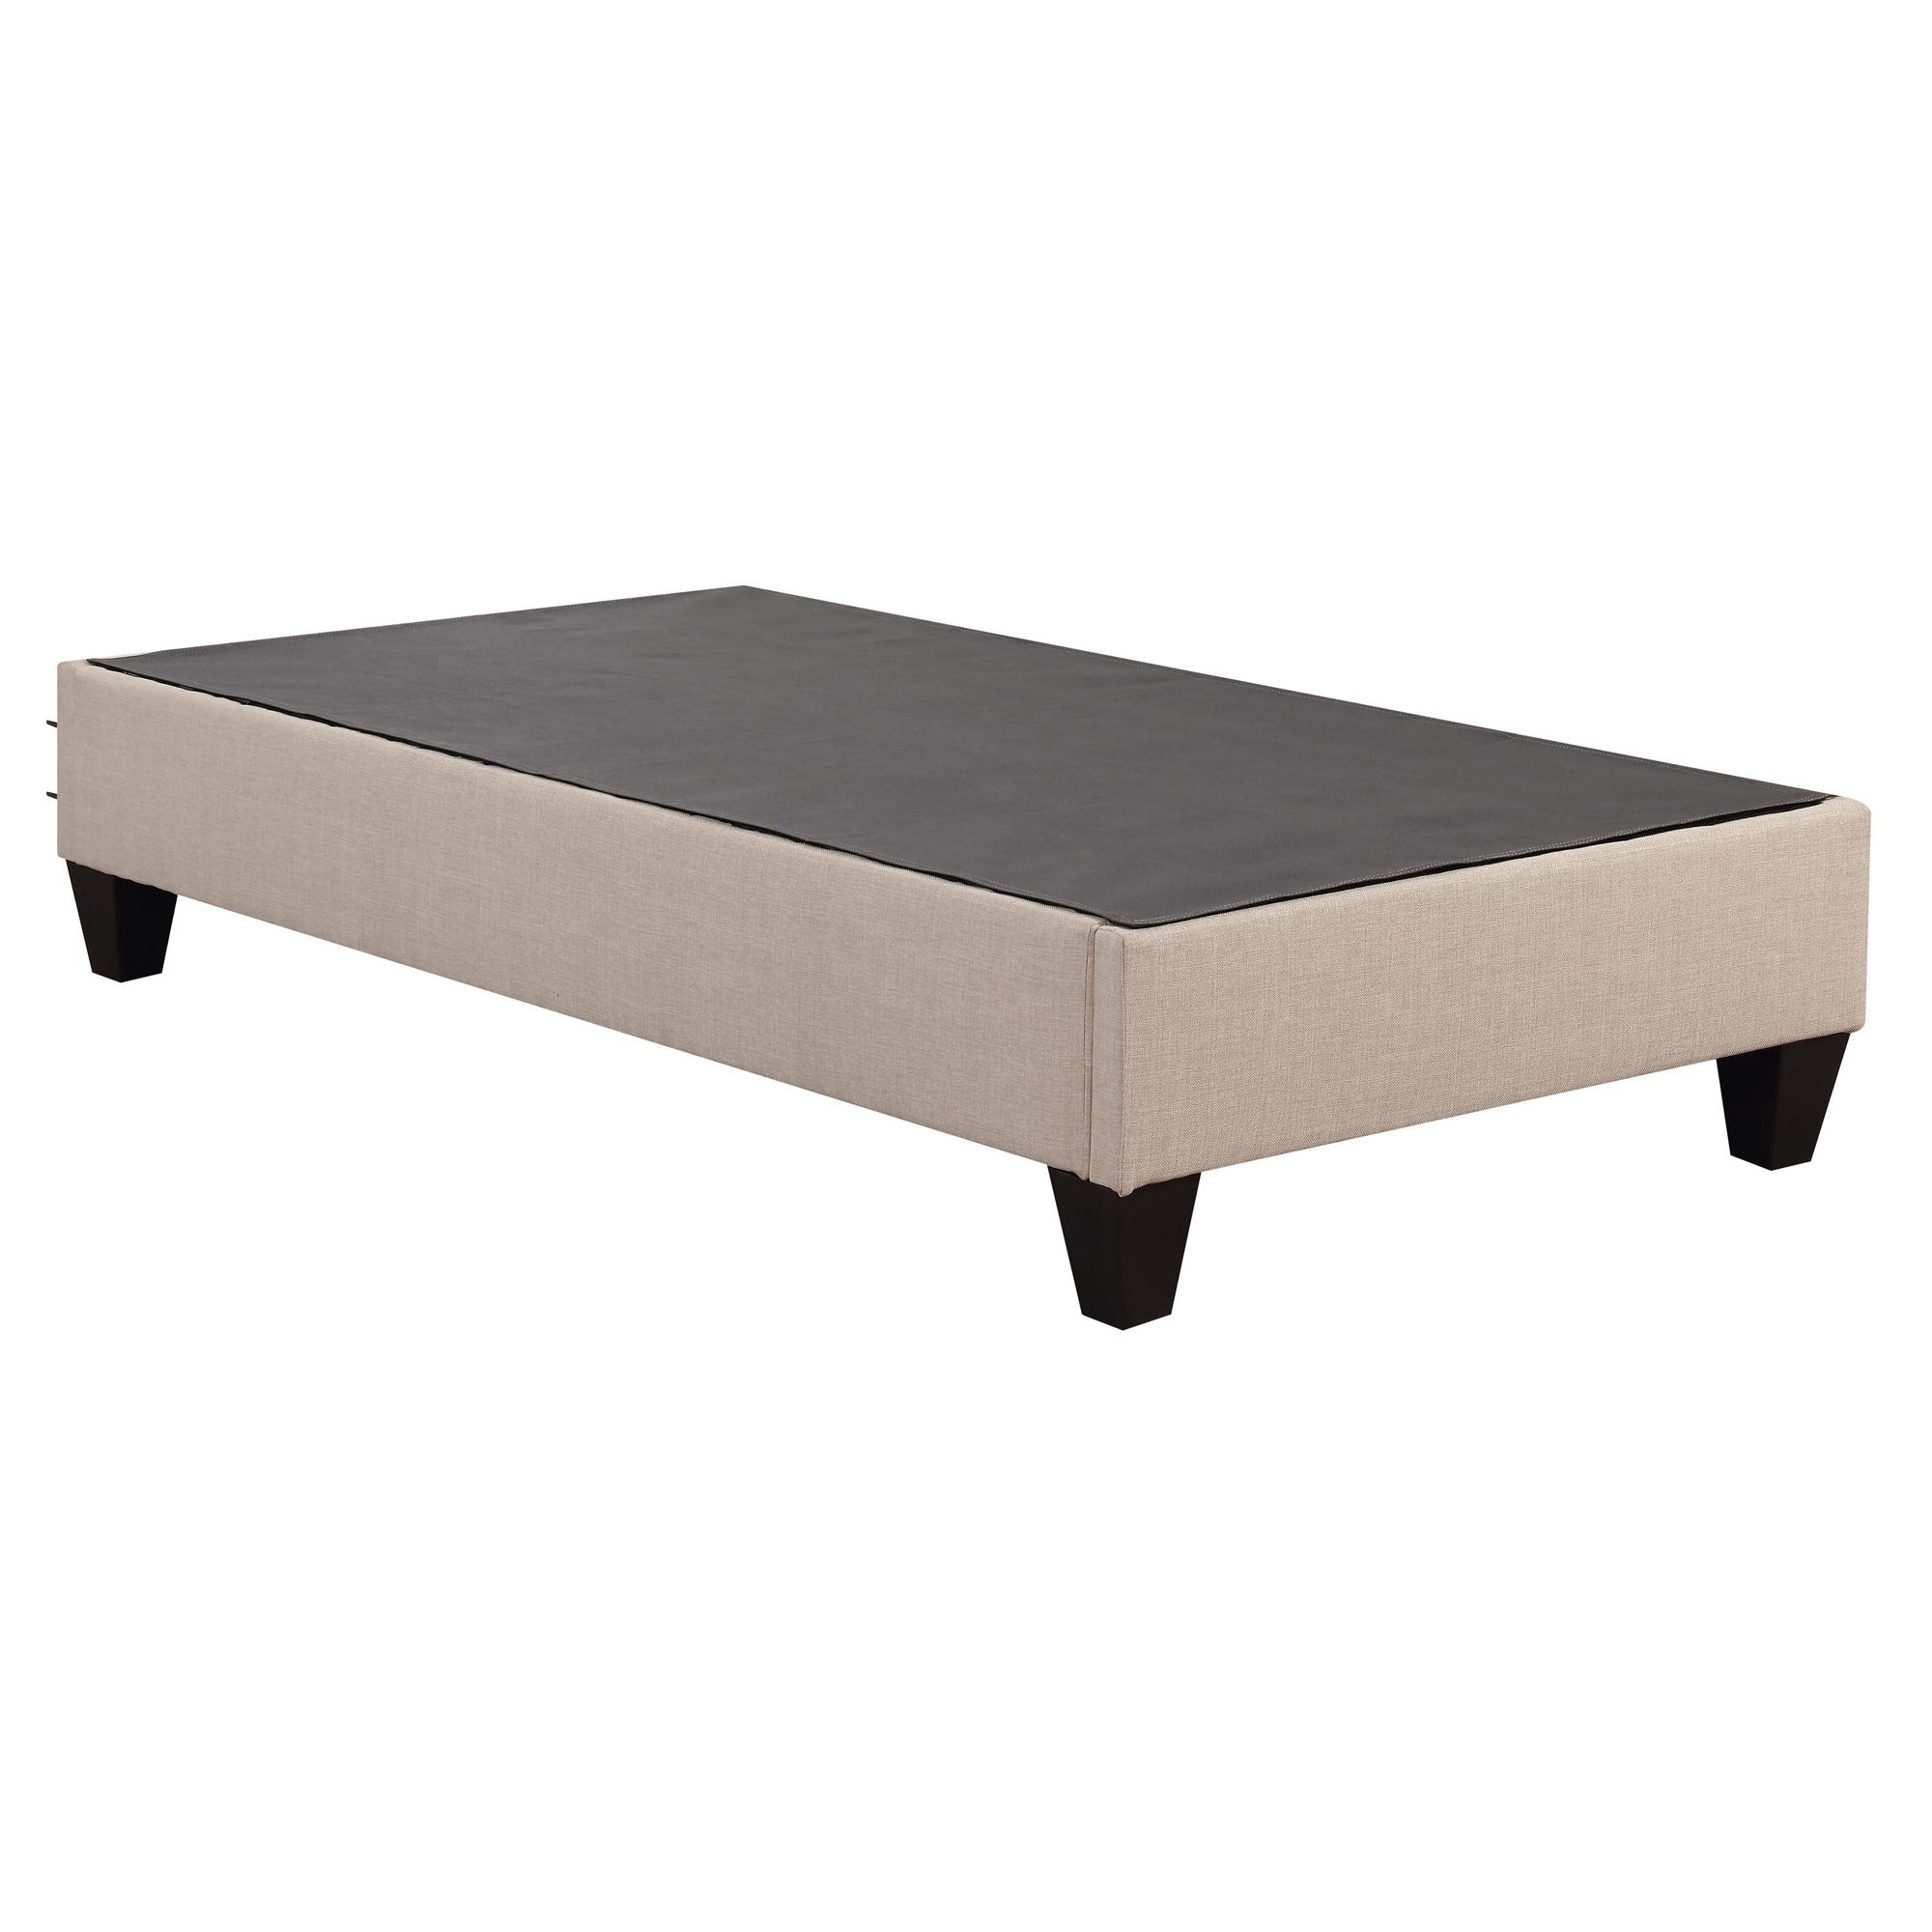 Abby - Twin Platform Bed - Natural